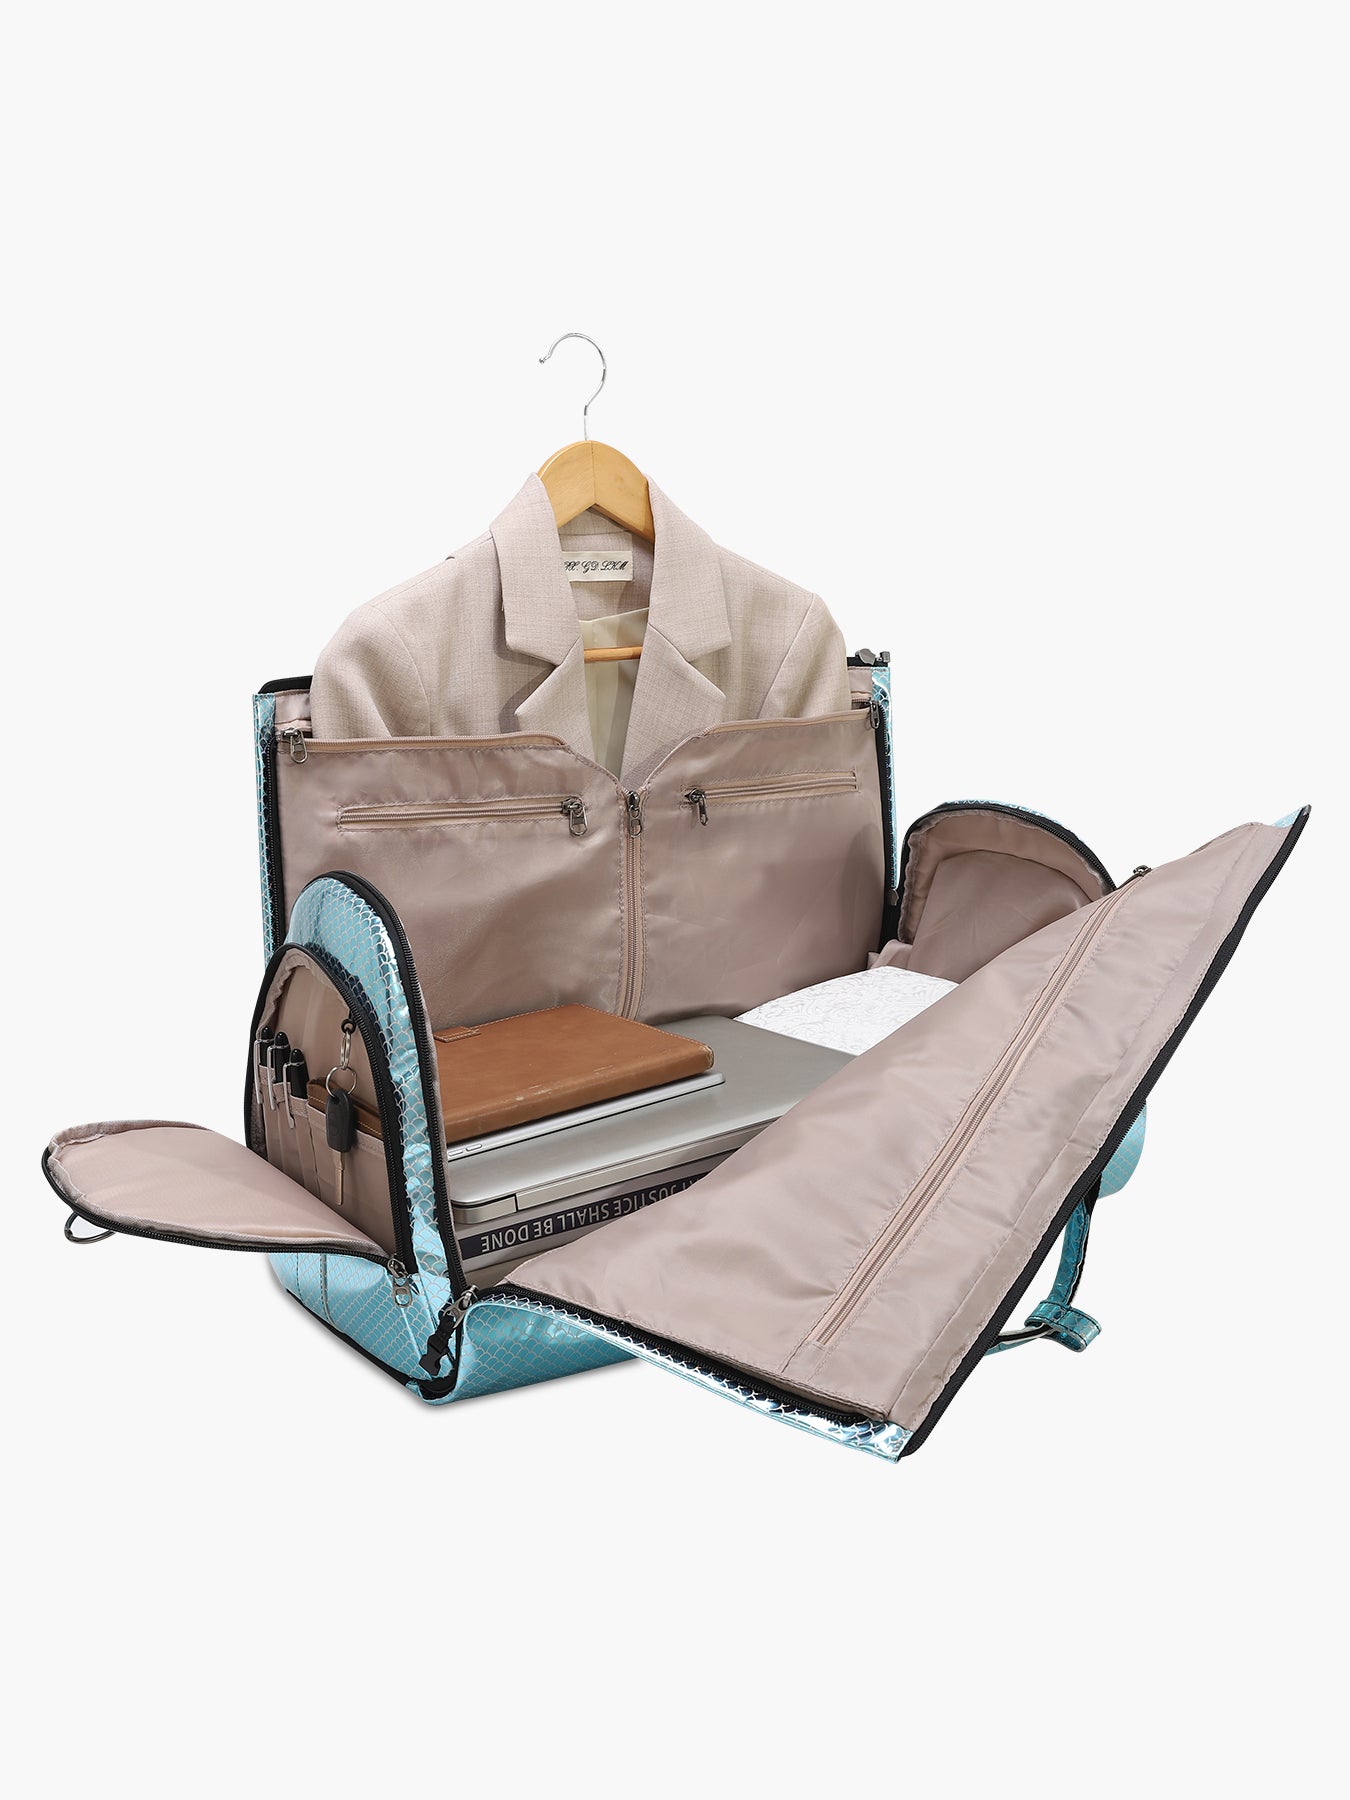 Foldable Carry On Garment Bag Gifts for Business Trip